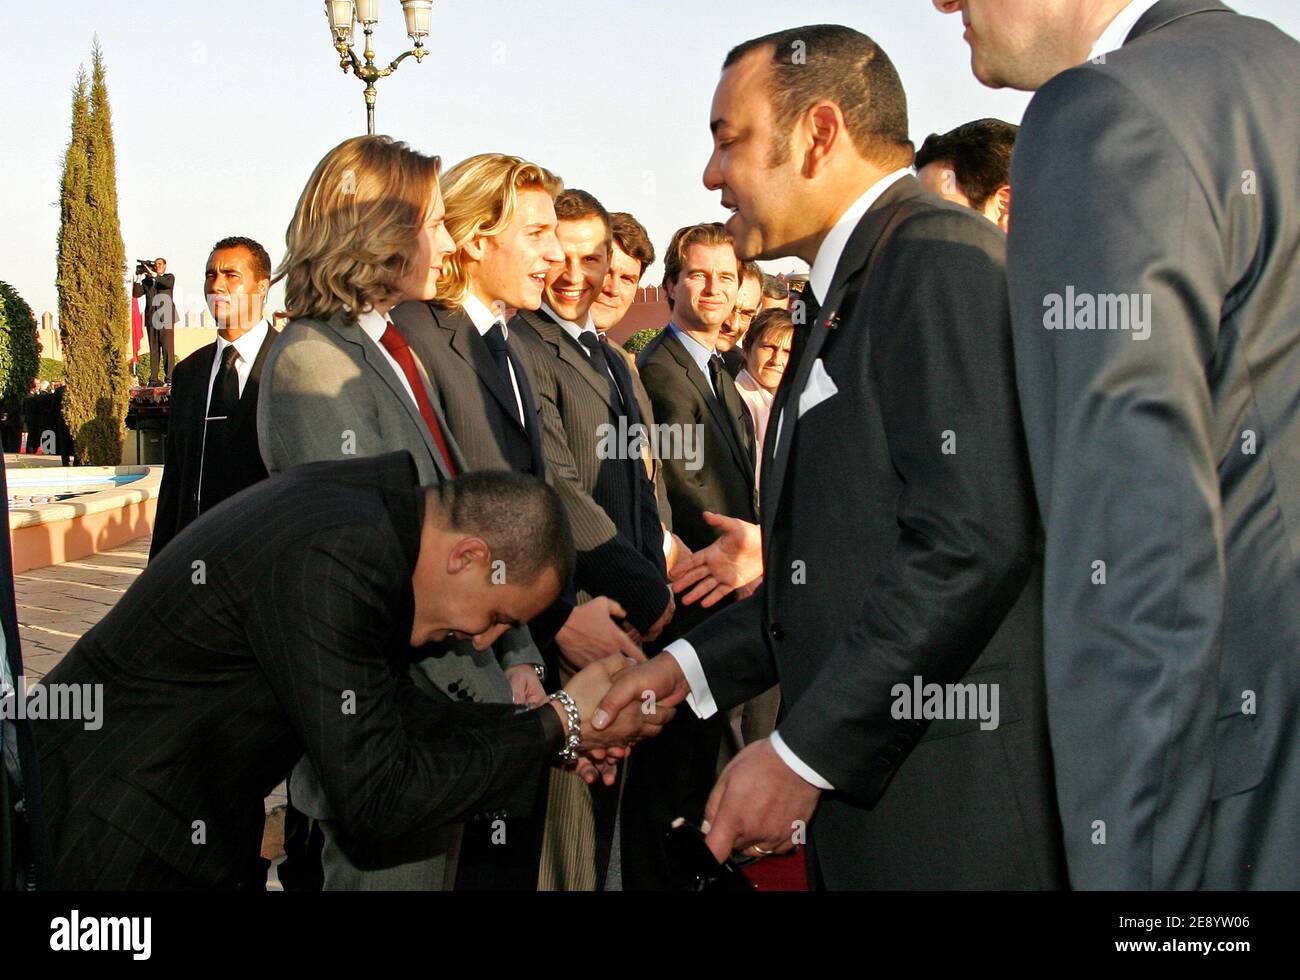 Morocco's King Mohammed VI greets Singer Faudel during a welcome ceremony at the Marrakech airport, Morocco, on October 22, 2007, on the first day of a 3-Day state visit to Morocco Kingdom. Photo by Christophe Guibbaud/ABACAPRESS.COM Stock Photo